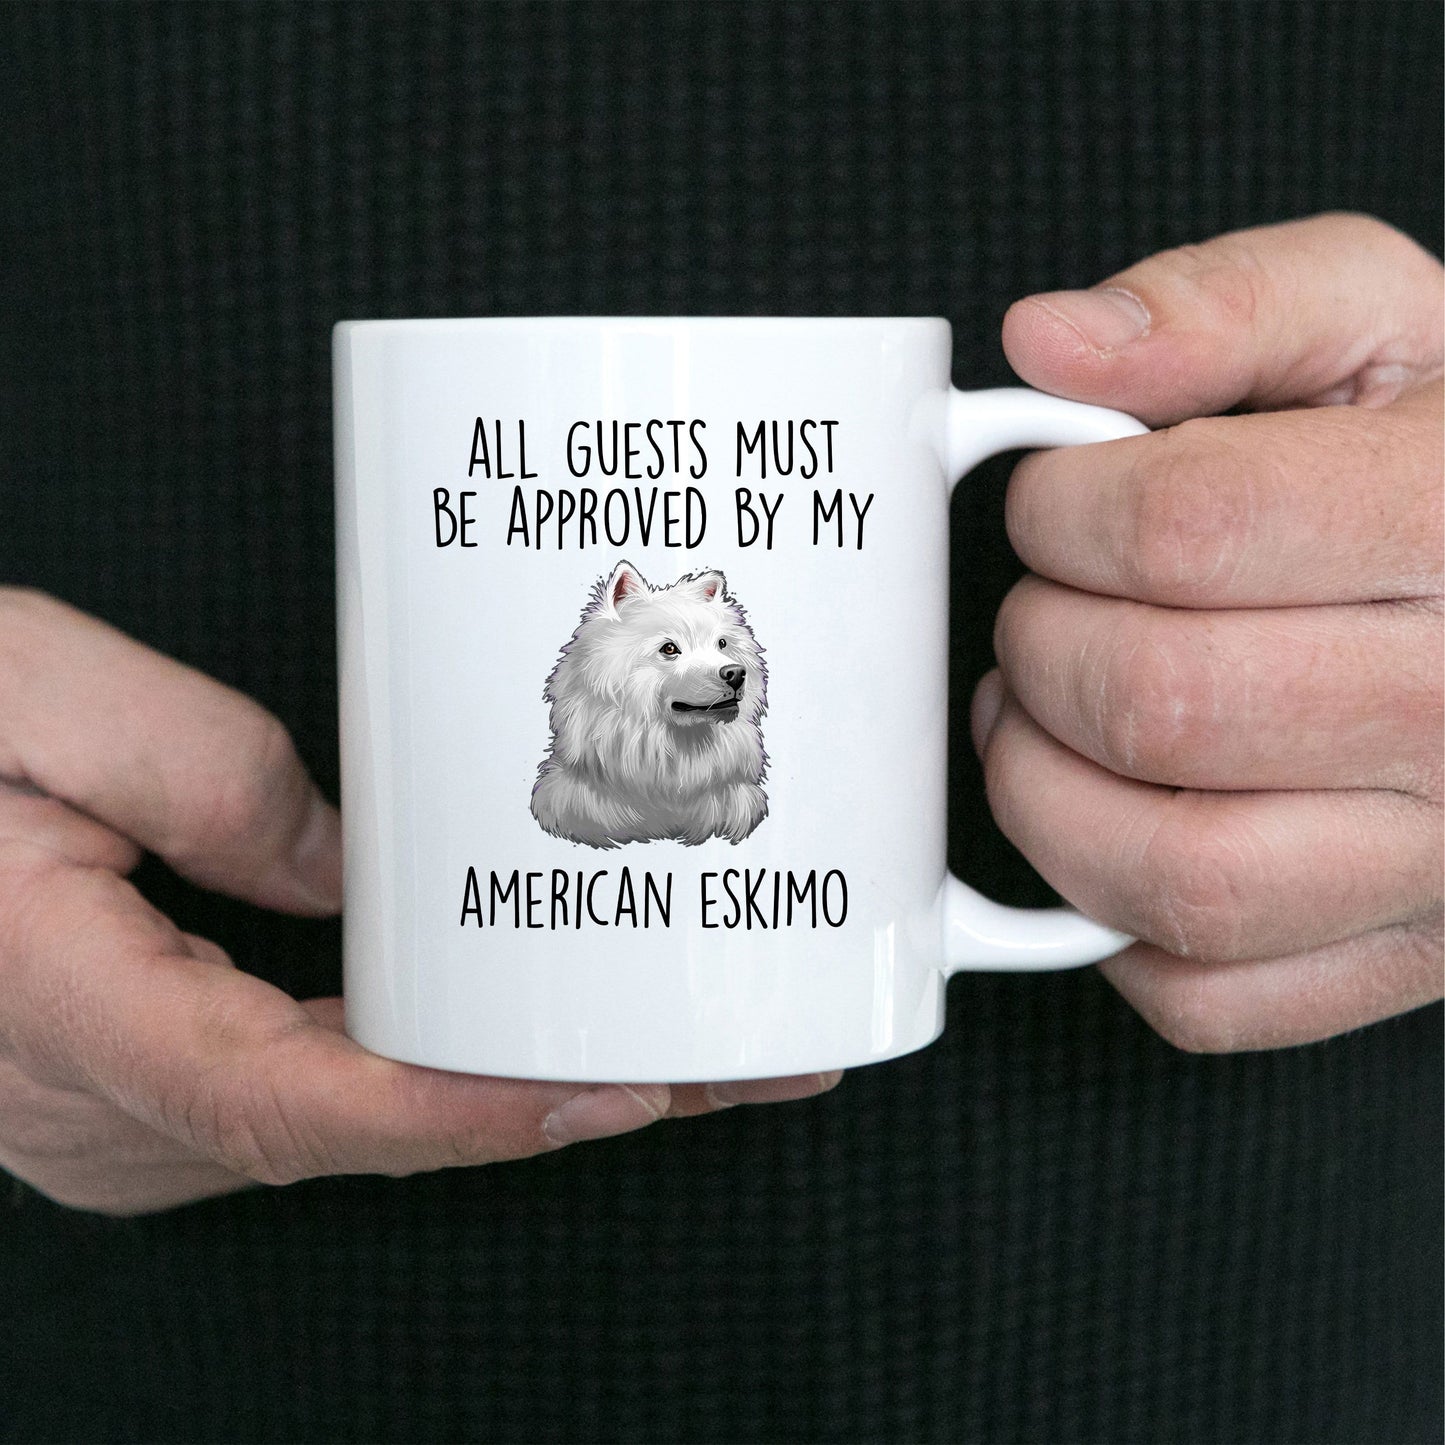 American Eskimo Dog Ceramic Coffee Mug Guests Must Be Approved